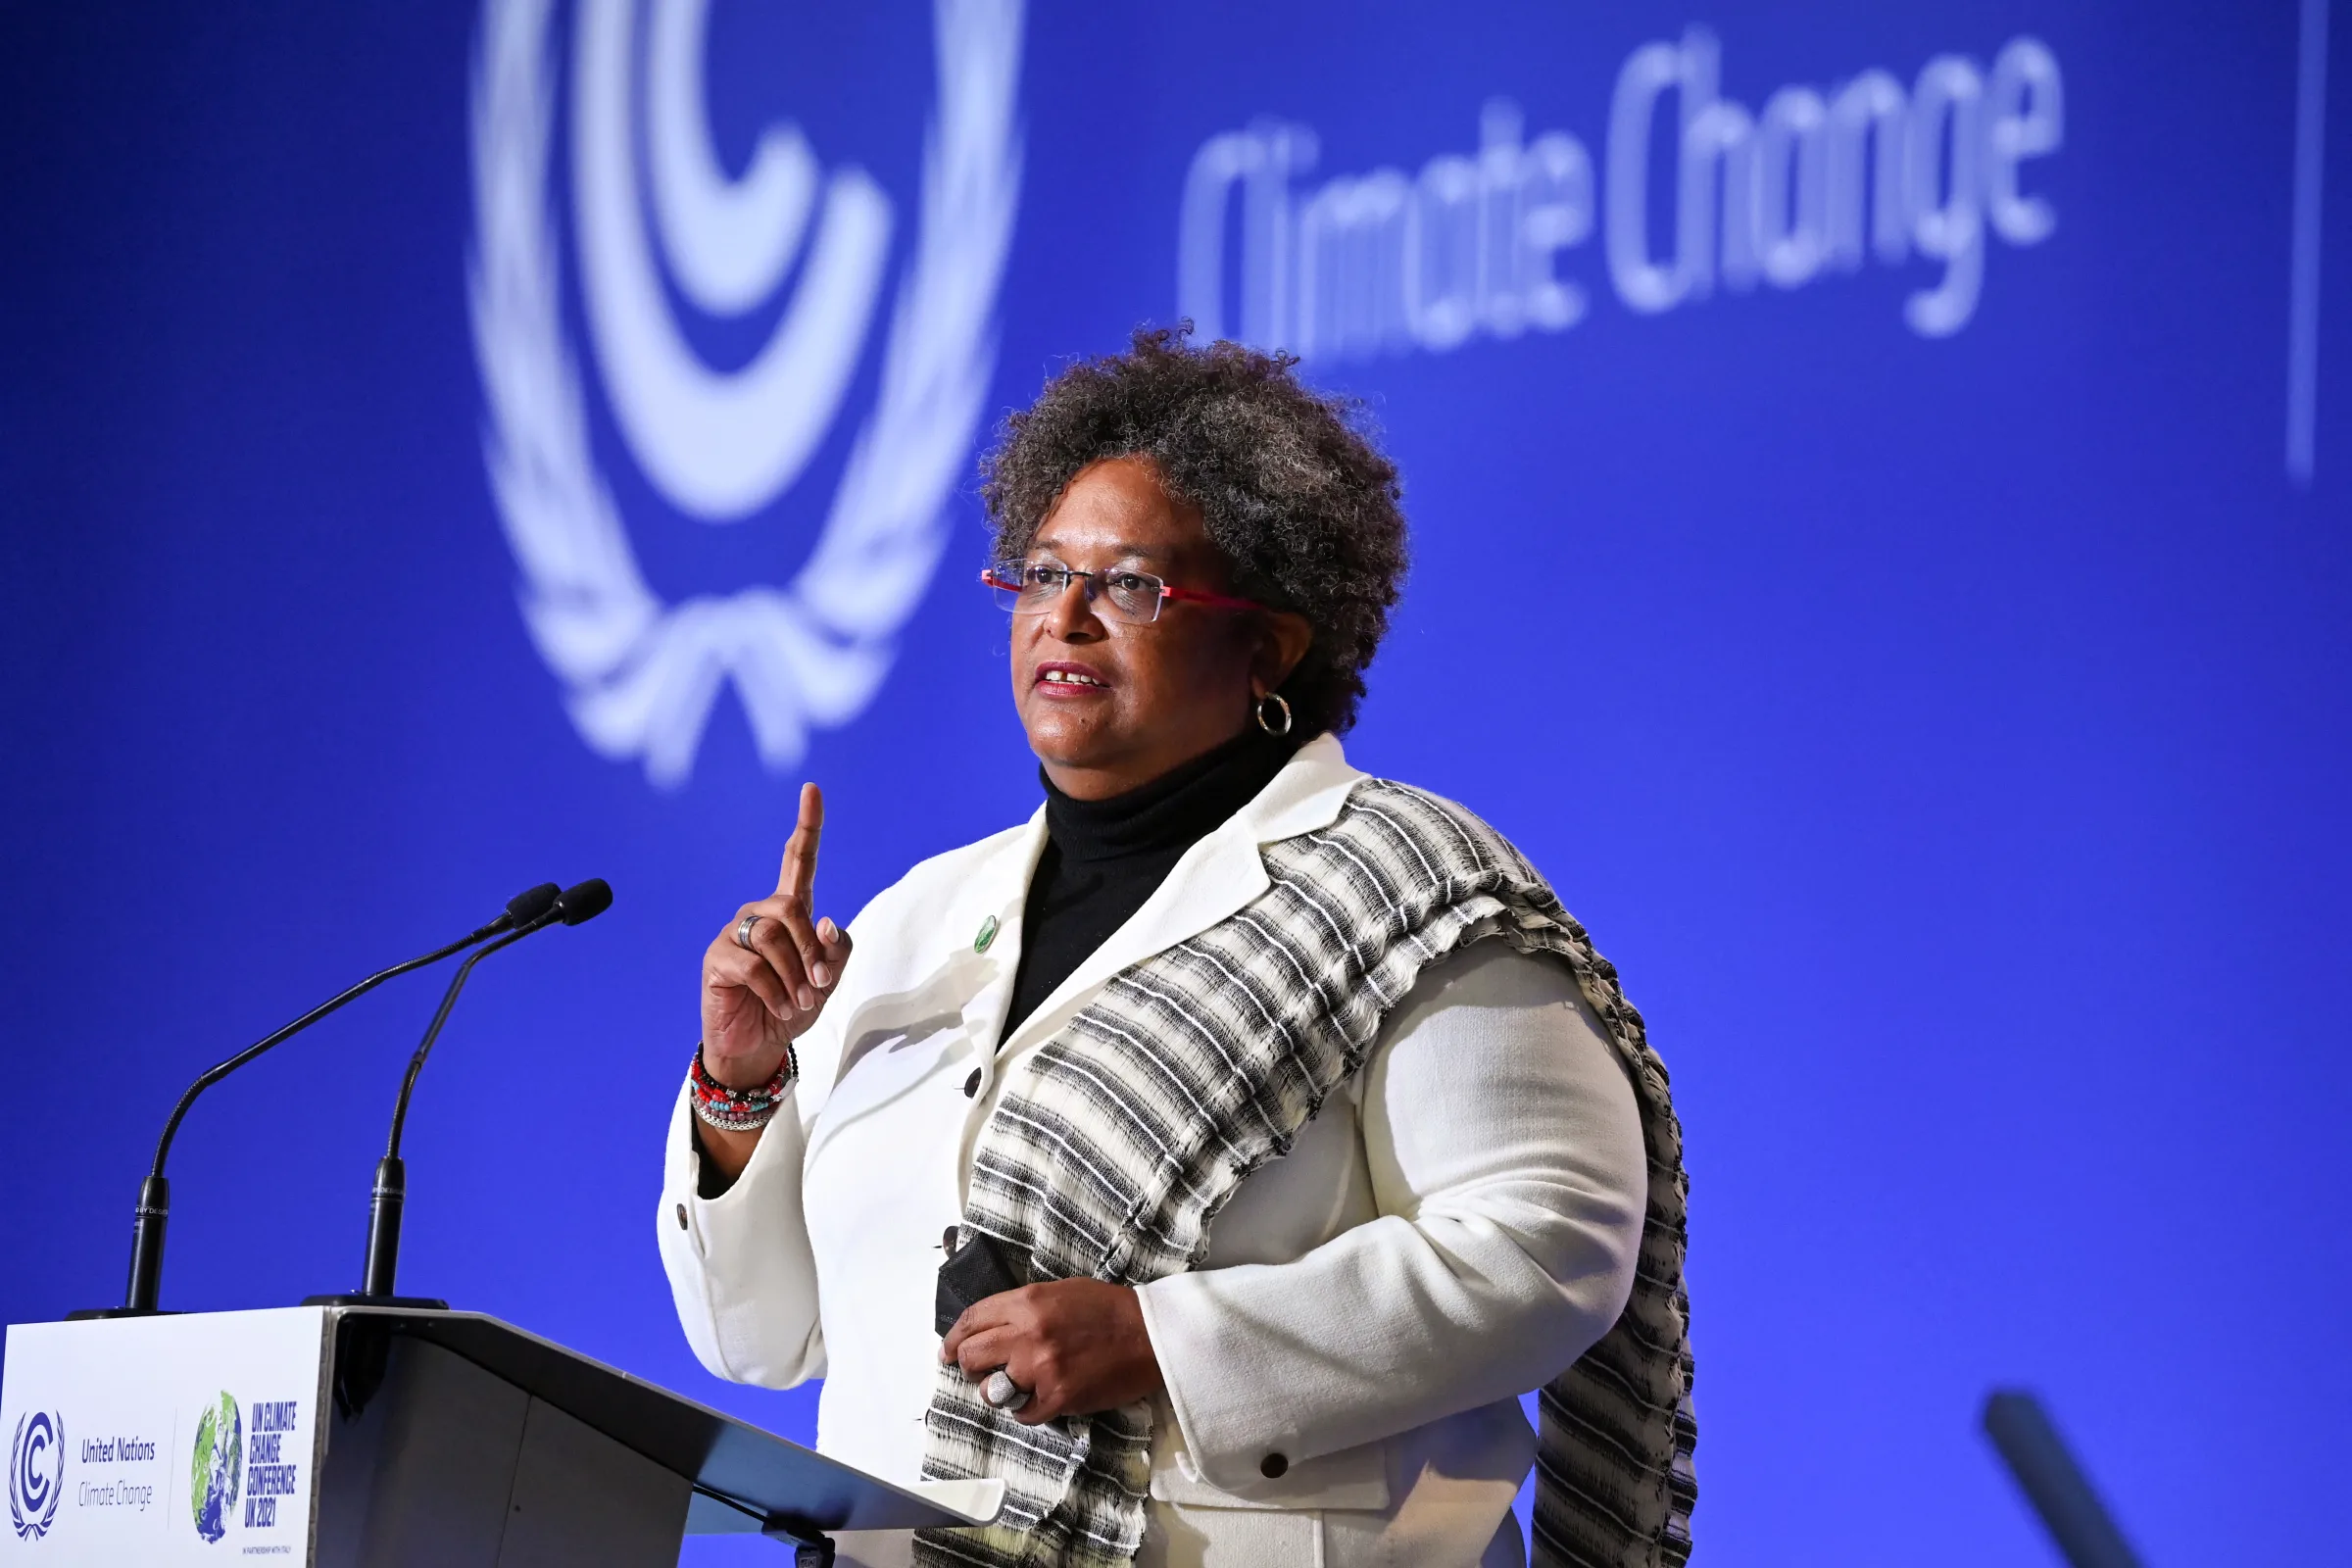 Barbados Prime Minister Mia Amor Mottley speaks during the opening ceremony of the UN Climate Change Conference (COP26) in Glasgow, Scotland, Britain November 1, 2021